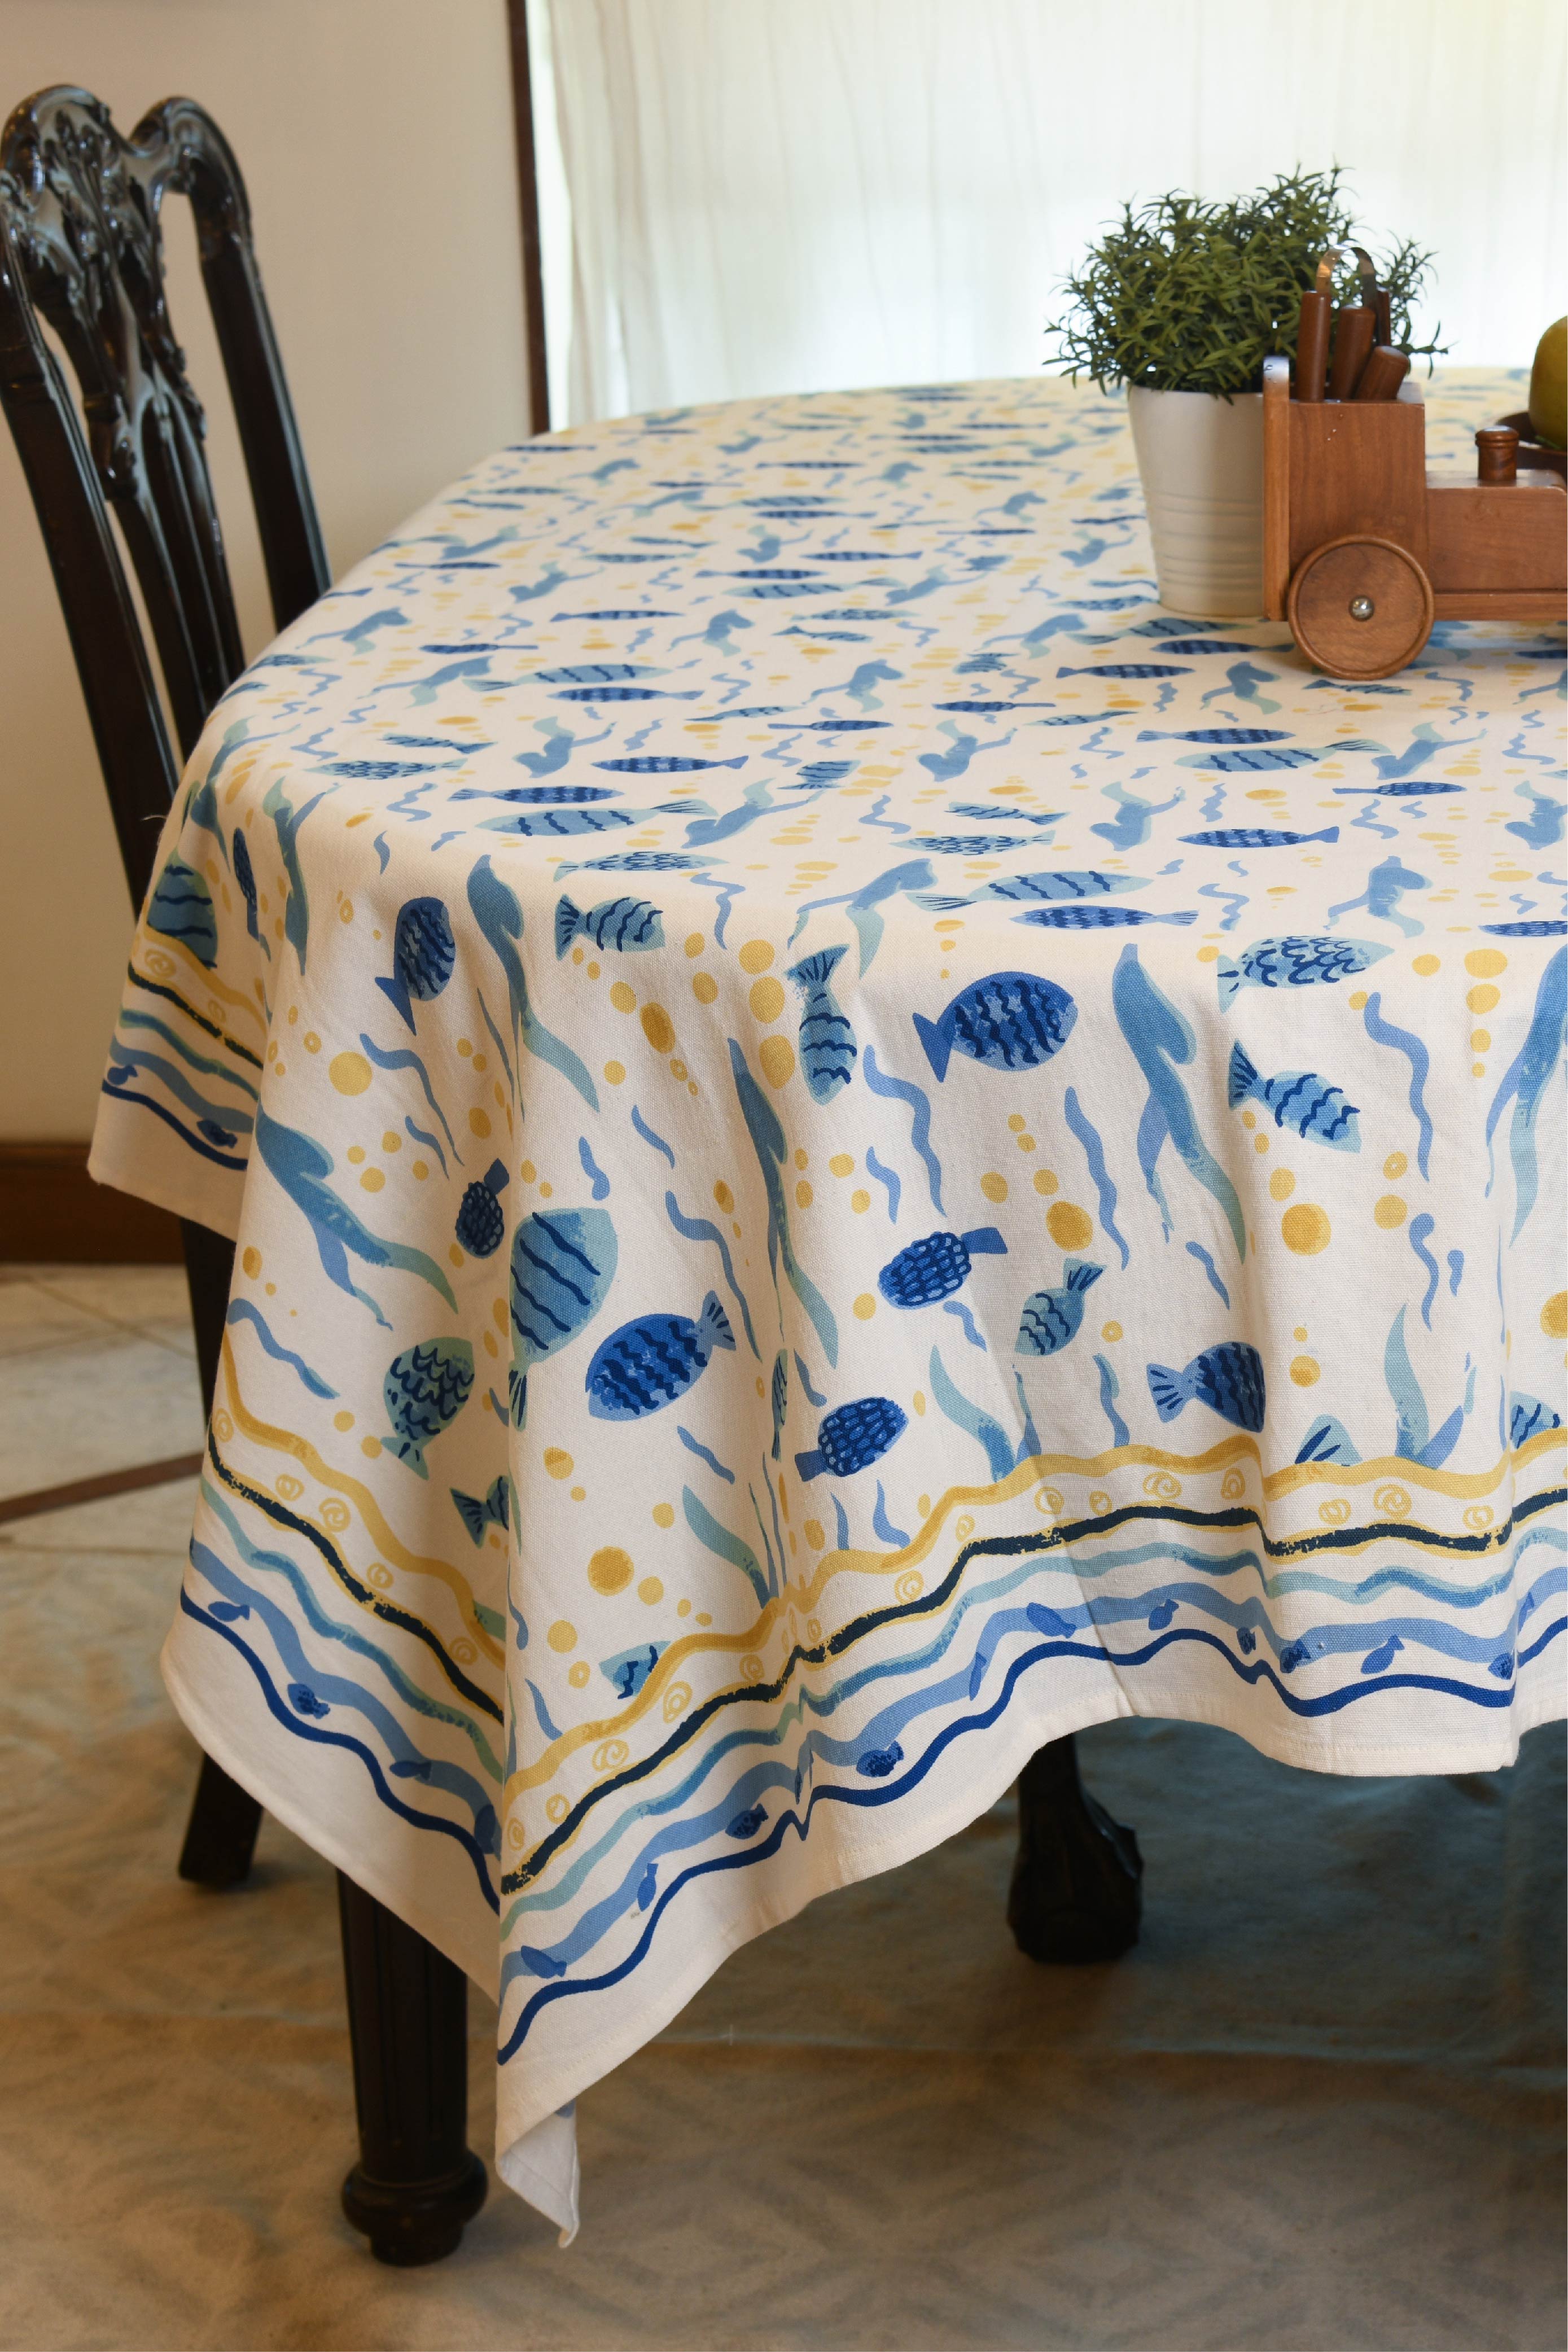 Blue Marine Table Cover